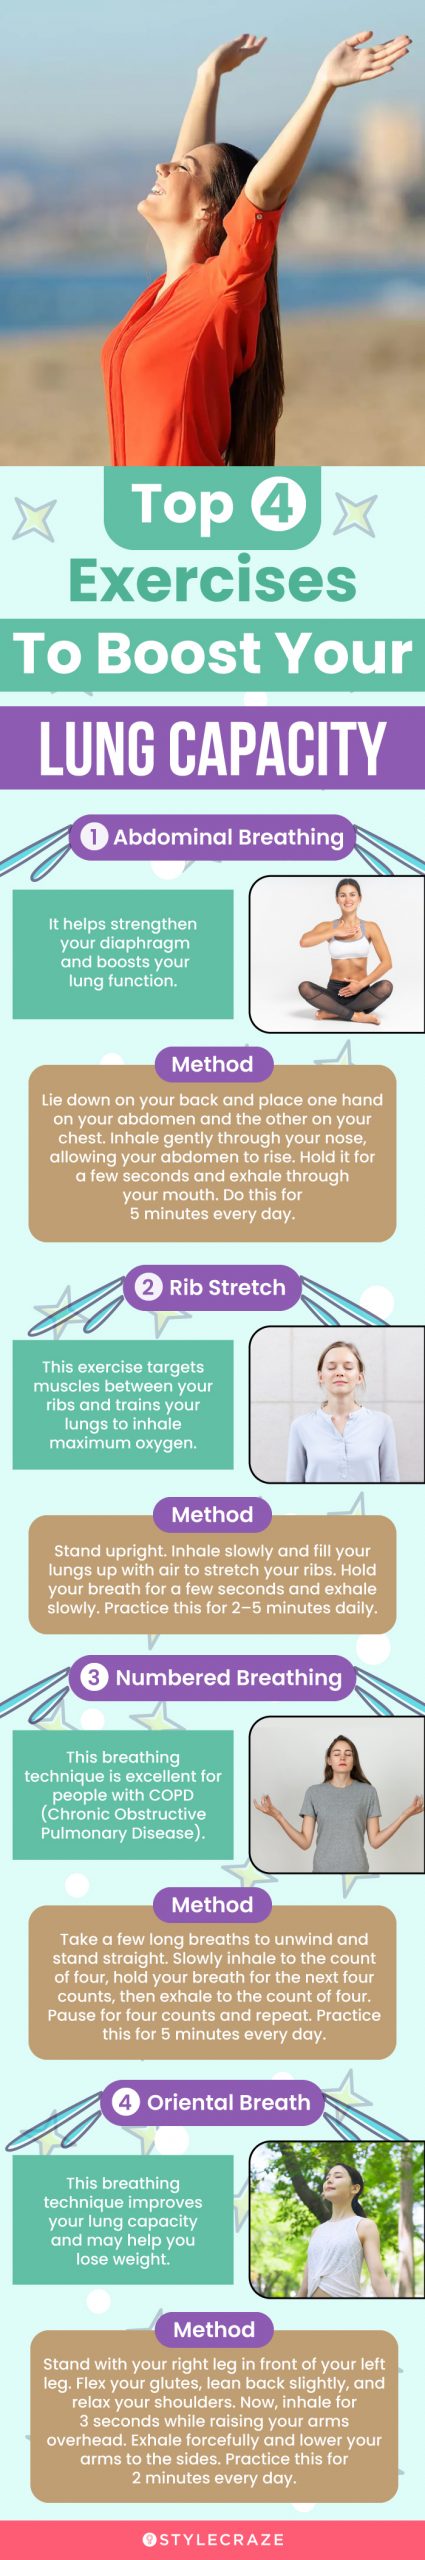 top 4 exercises to boost your lung capacity (infographic)